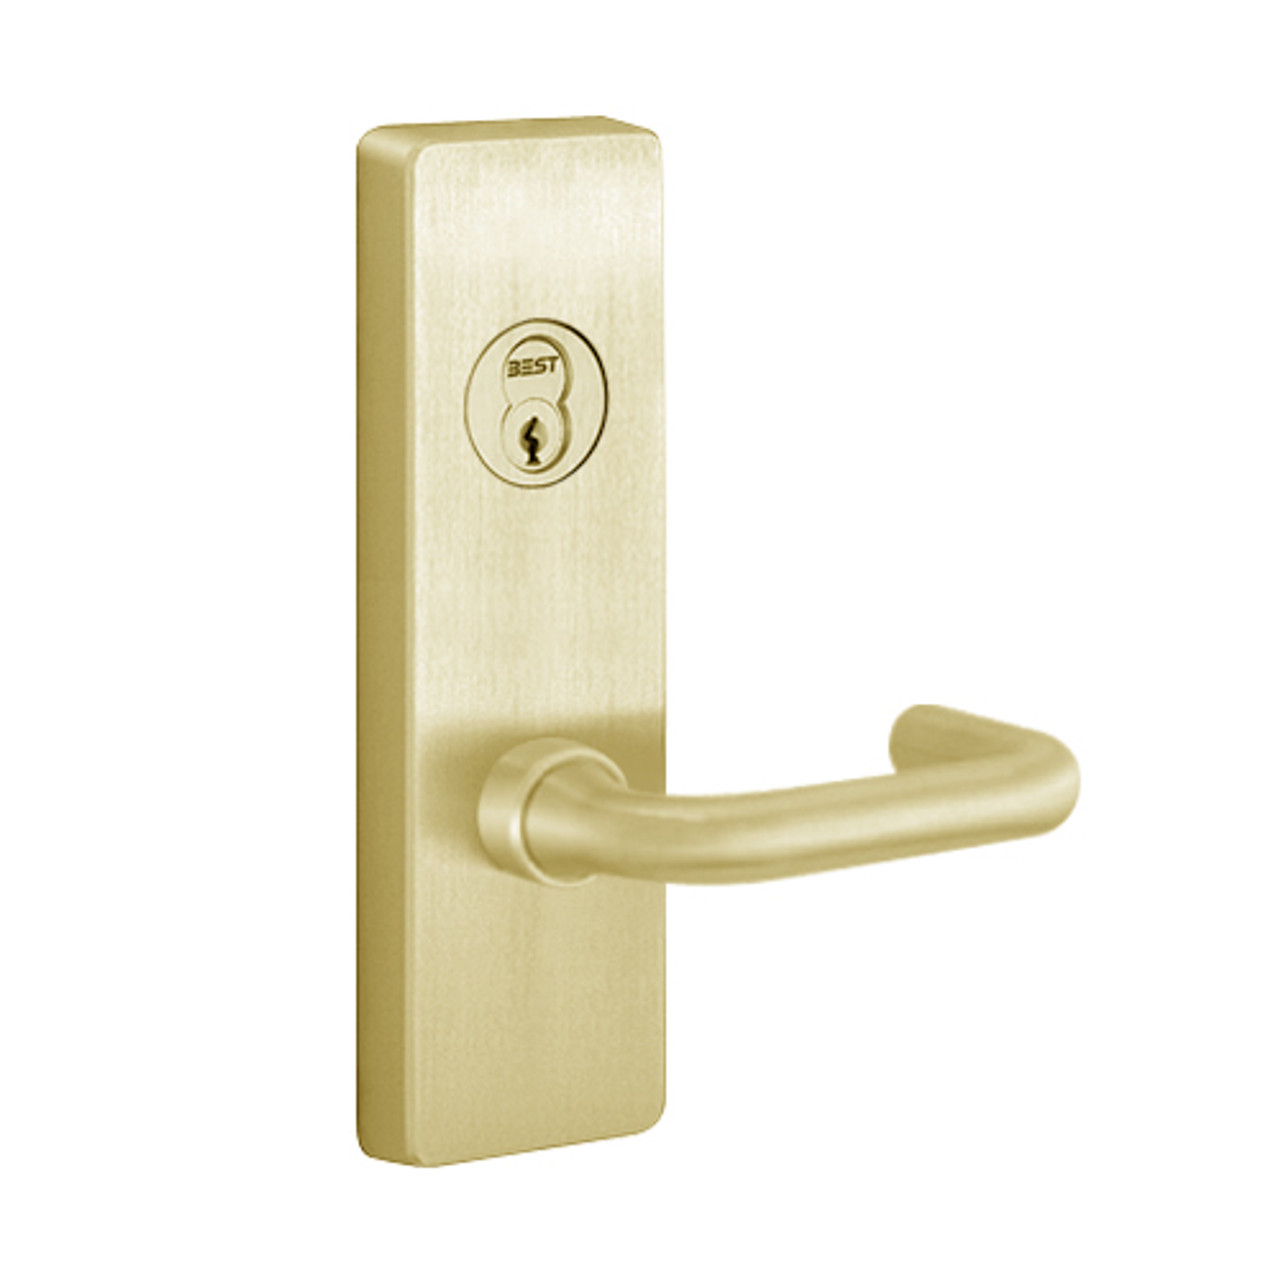 R4914C-605-LHR PHI Lever Retrofit Trim Always Active with C Lever Design for Apex and Olympian Series Exit Device in Bright Brass Finish